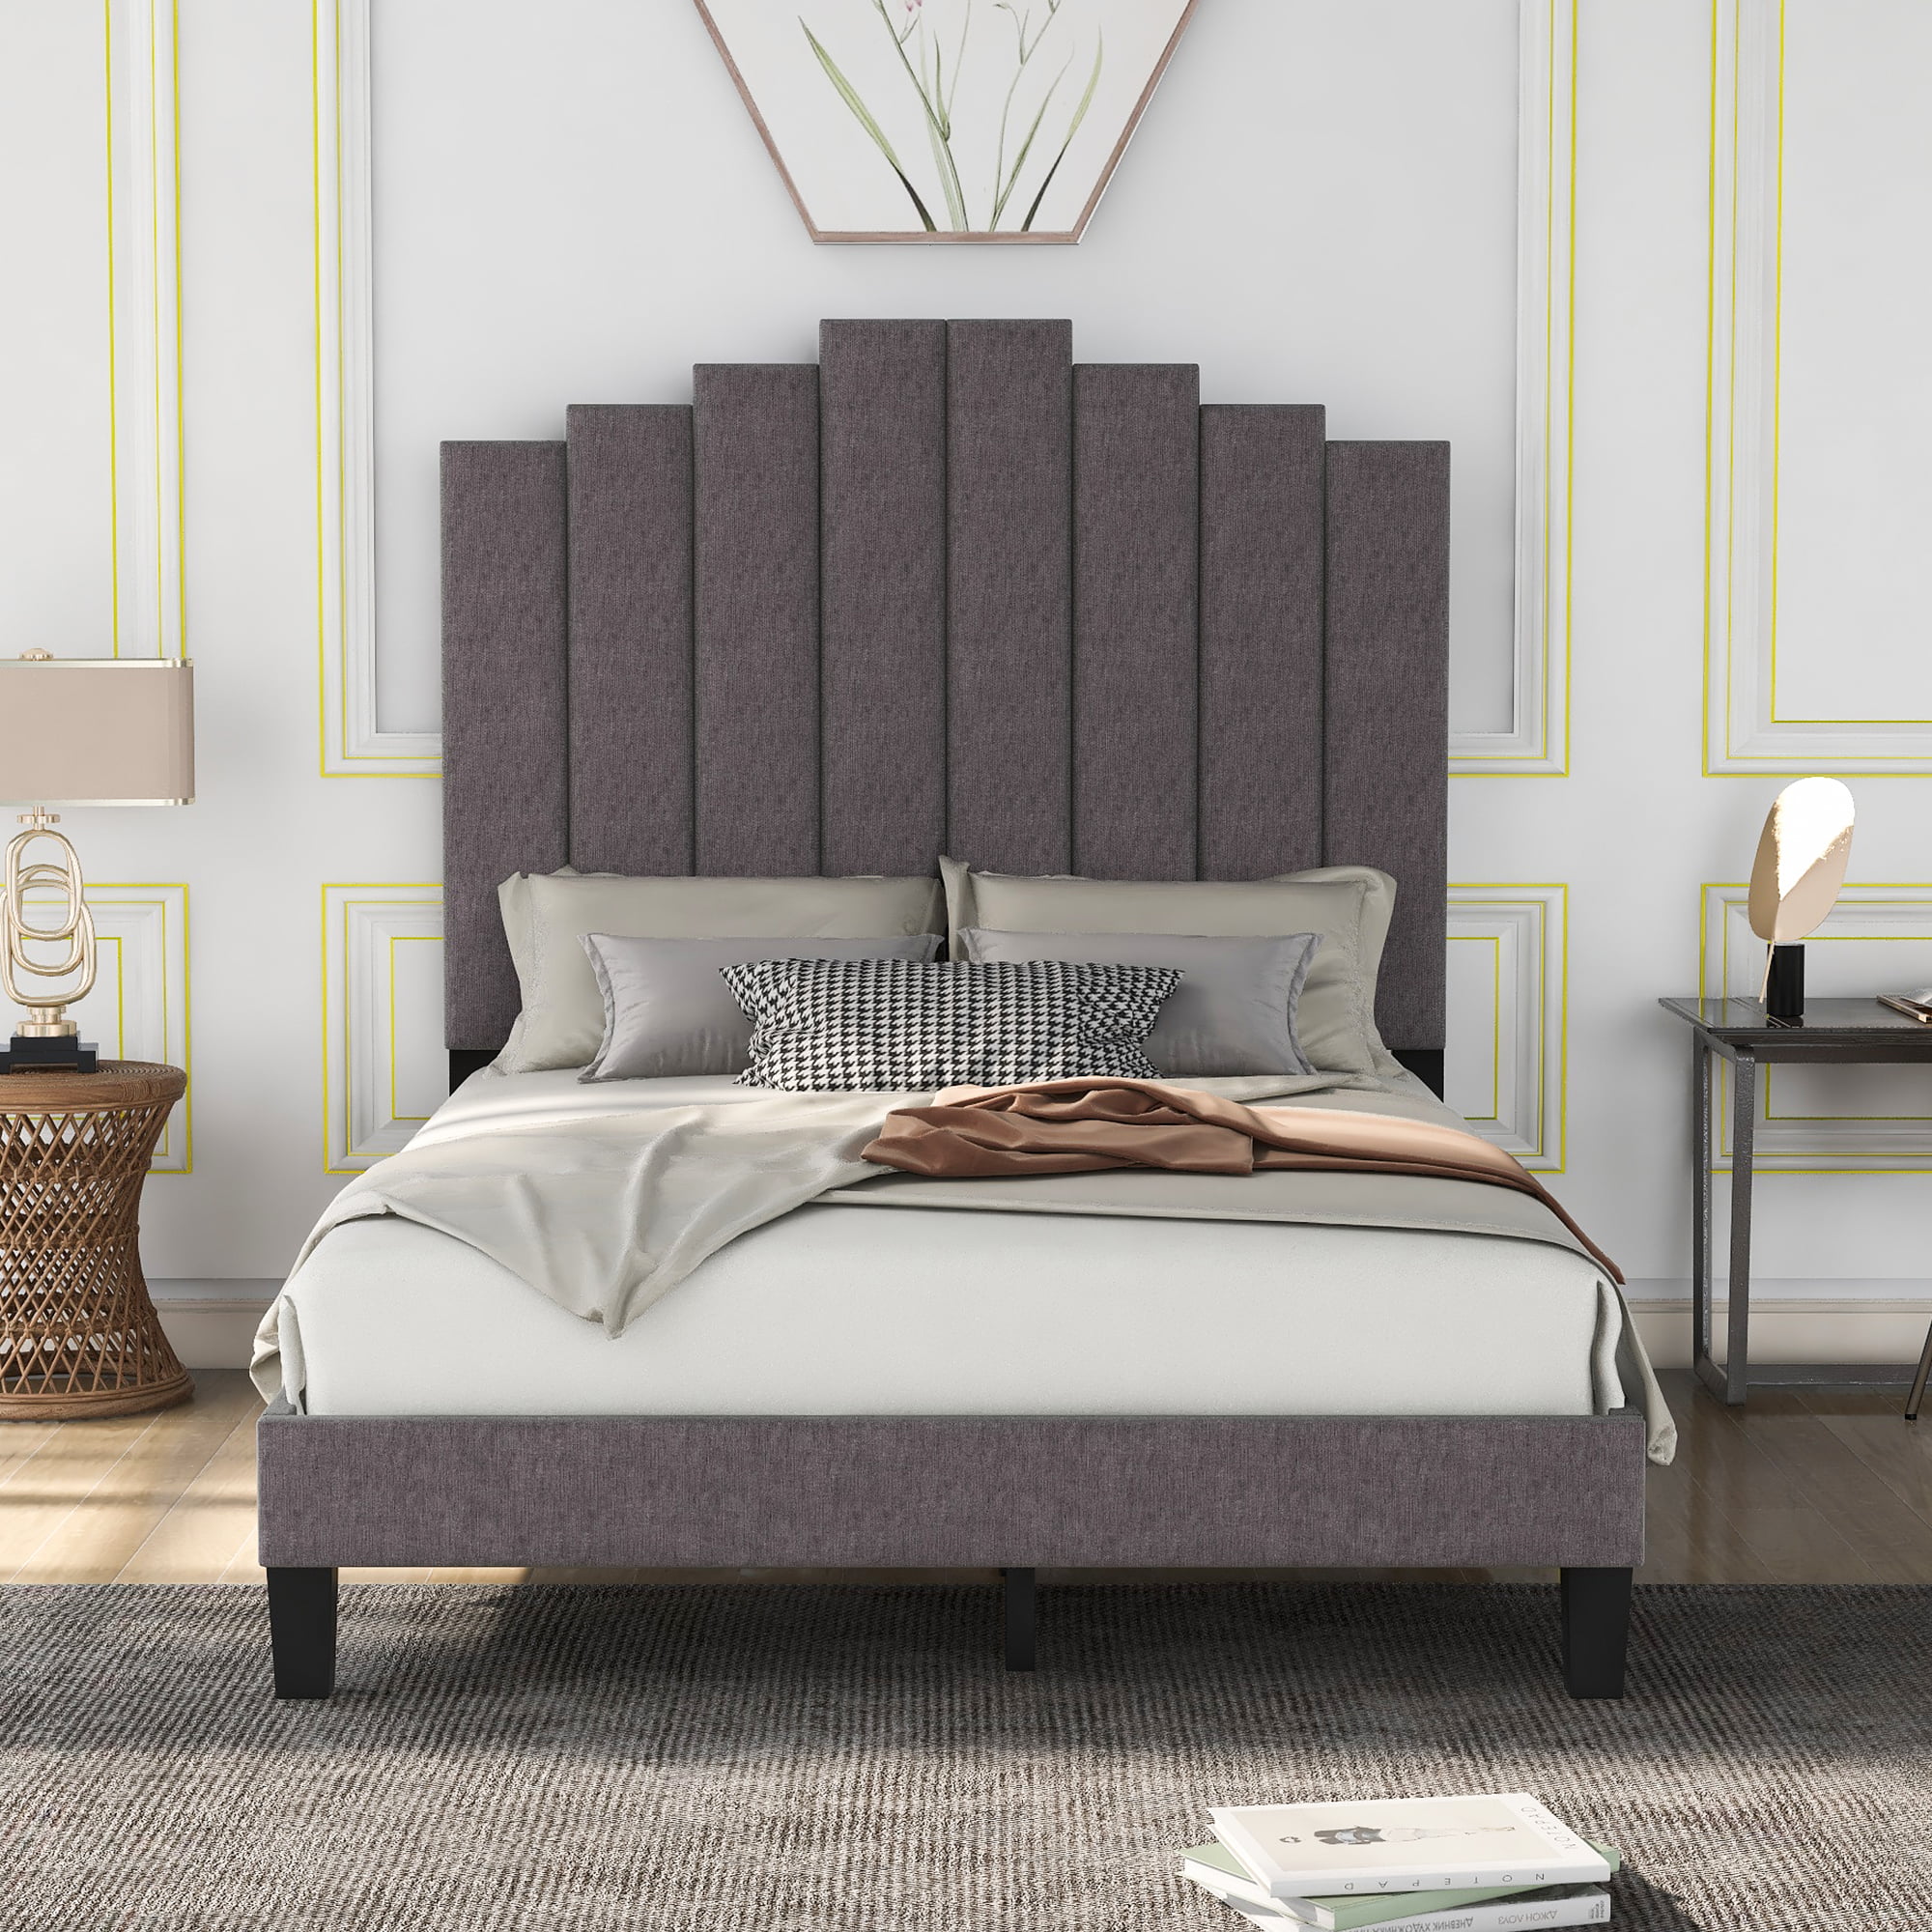 Platform Bed with Curved Rhombic Button Tufted Headboard SHA CERLIN Upholstered Full Size Bed Frame No Box Spring Needed Easy Assembly Dark Grey Wood Slat Support